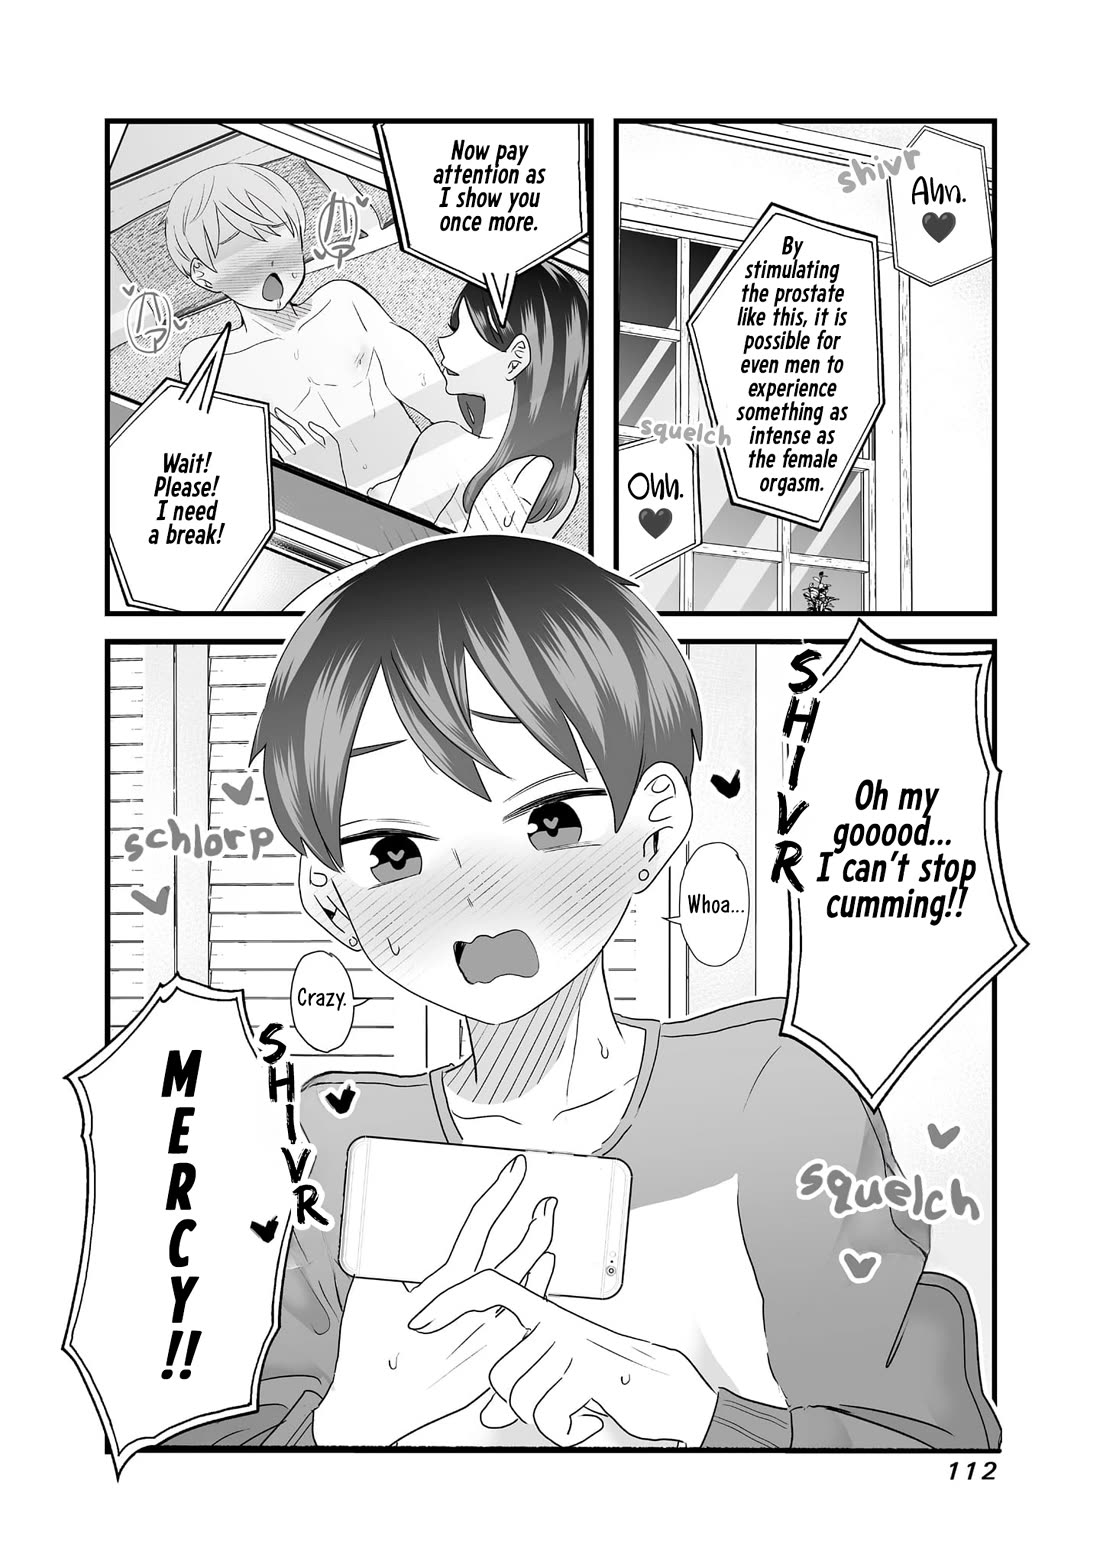 Sacchan and Ken-chan Are Going at it Again - chapter 13 - #4